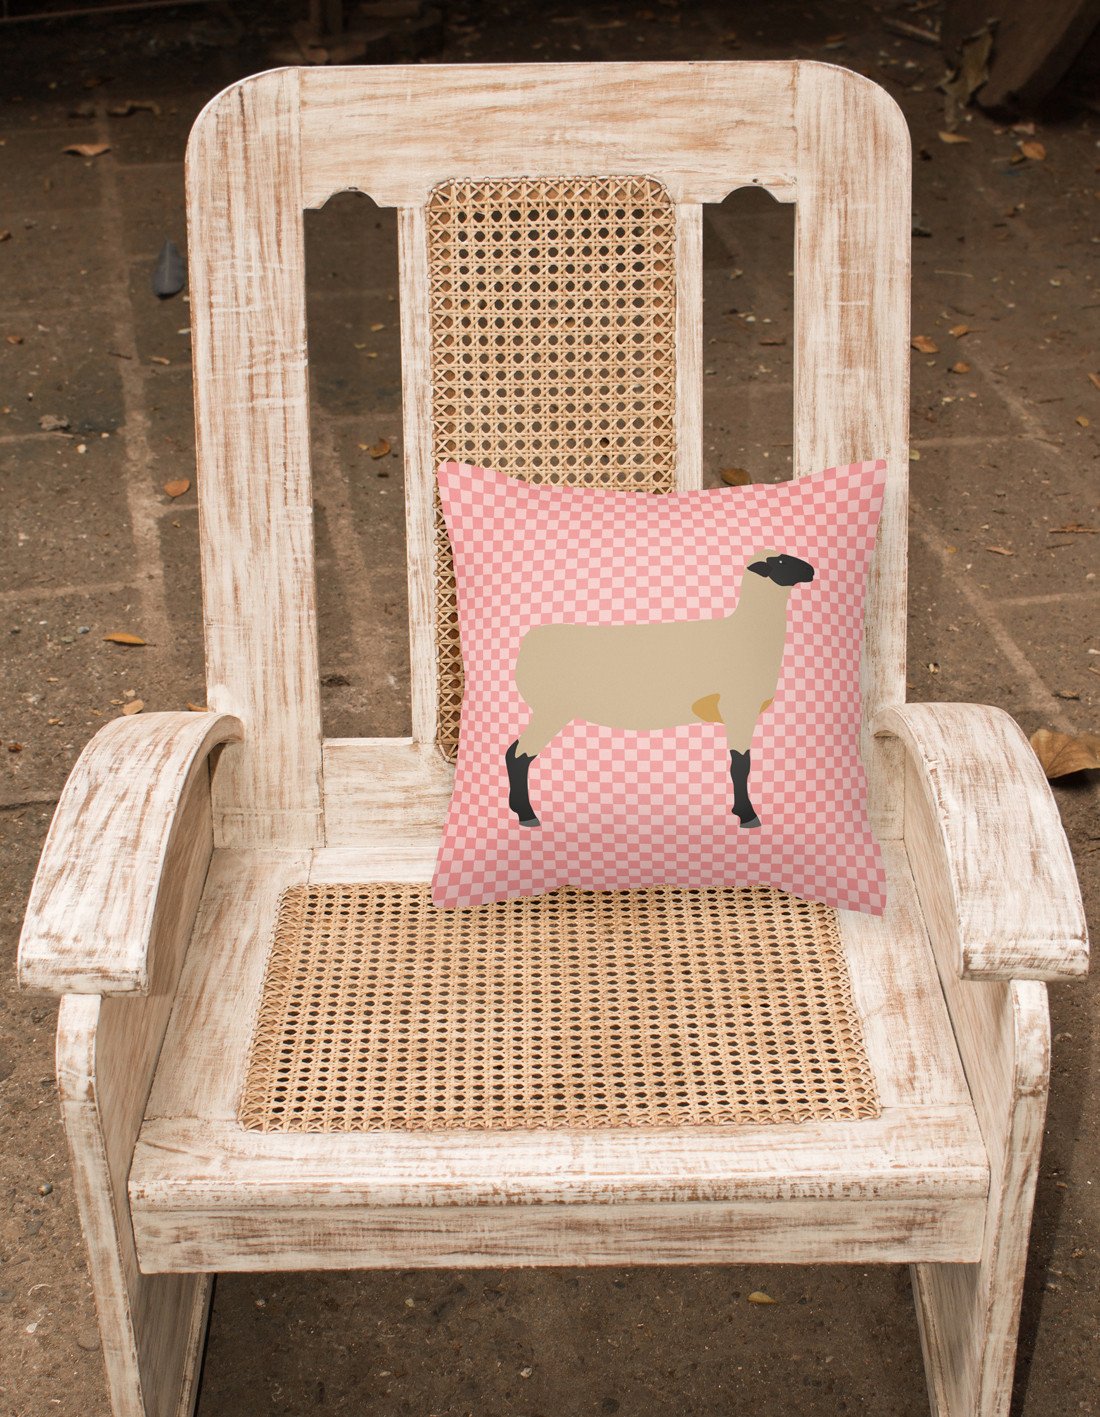 Hampshire Down Sheep Pink Check Fabric Decorative Pillow BB7976PW1818 by Caroline's Treasures